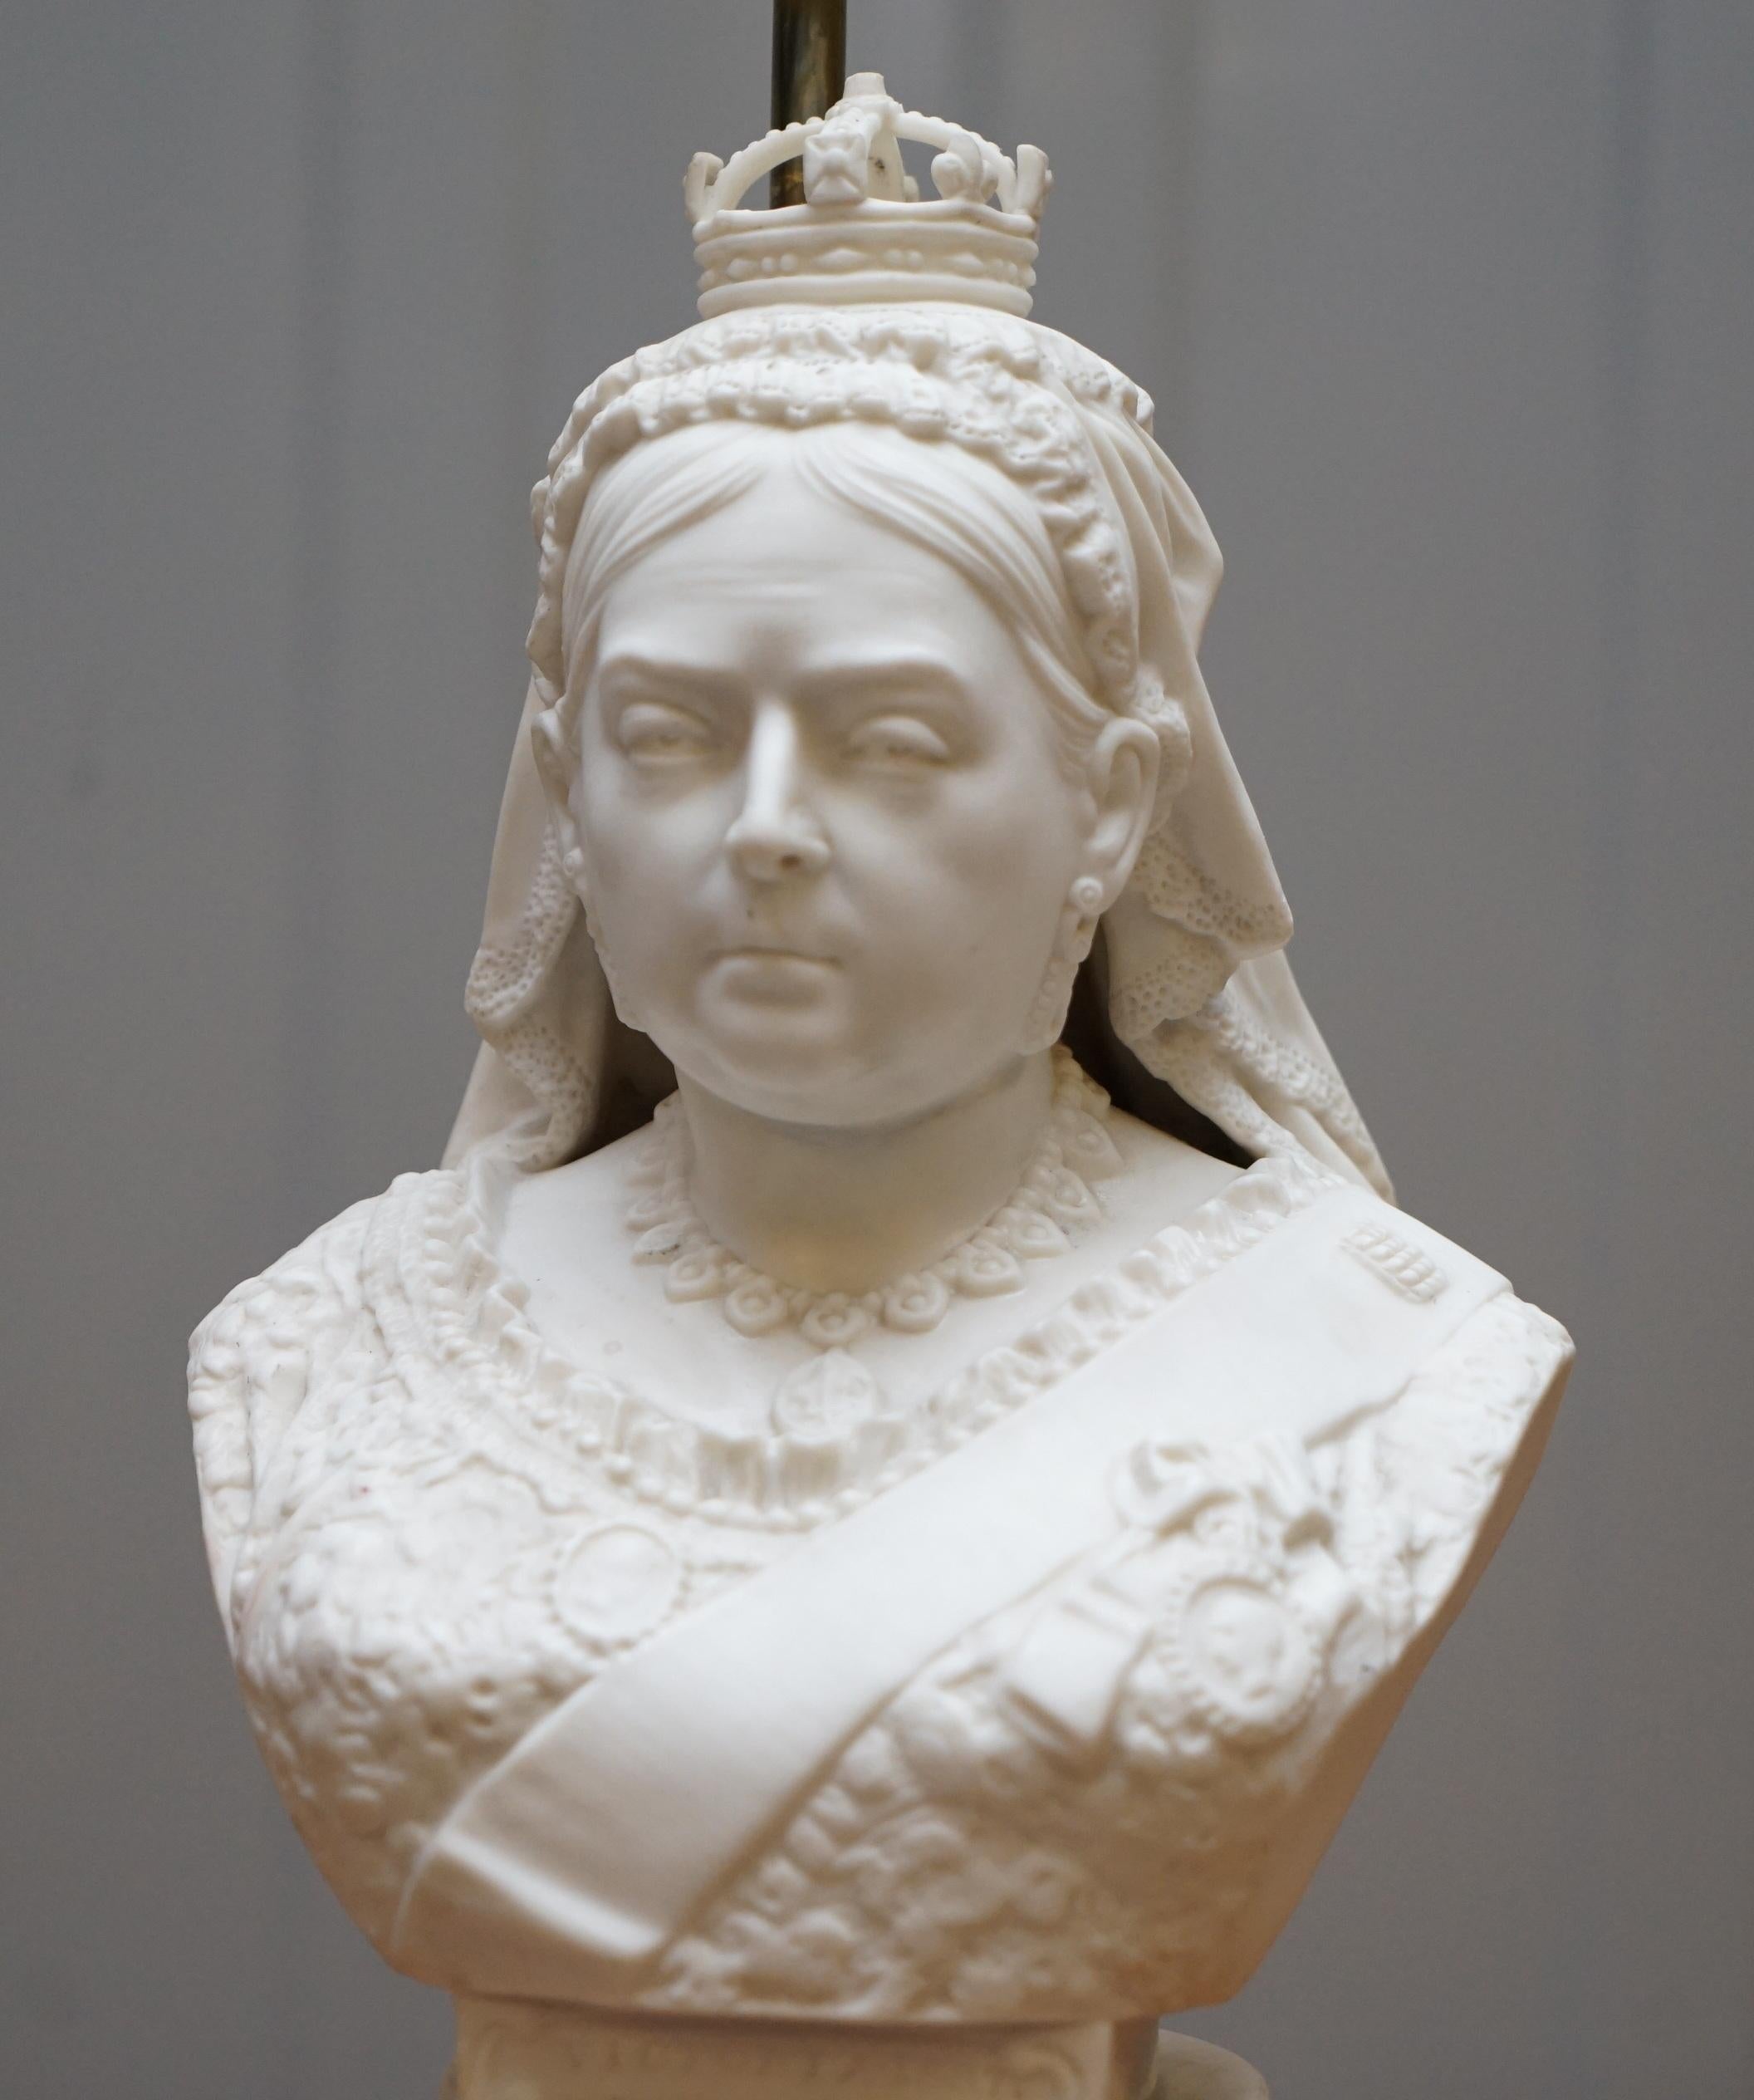 Hand-Crafted Good 19th Century Parian Figure of Queen Victoria Bust Made into a Table Lamp